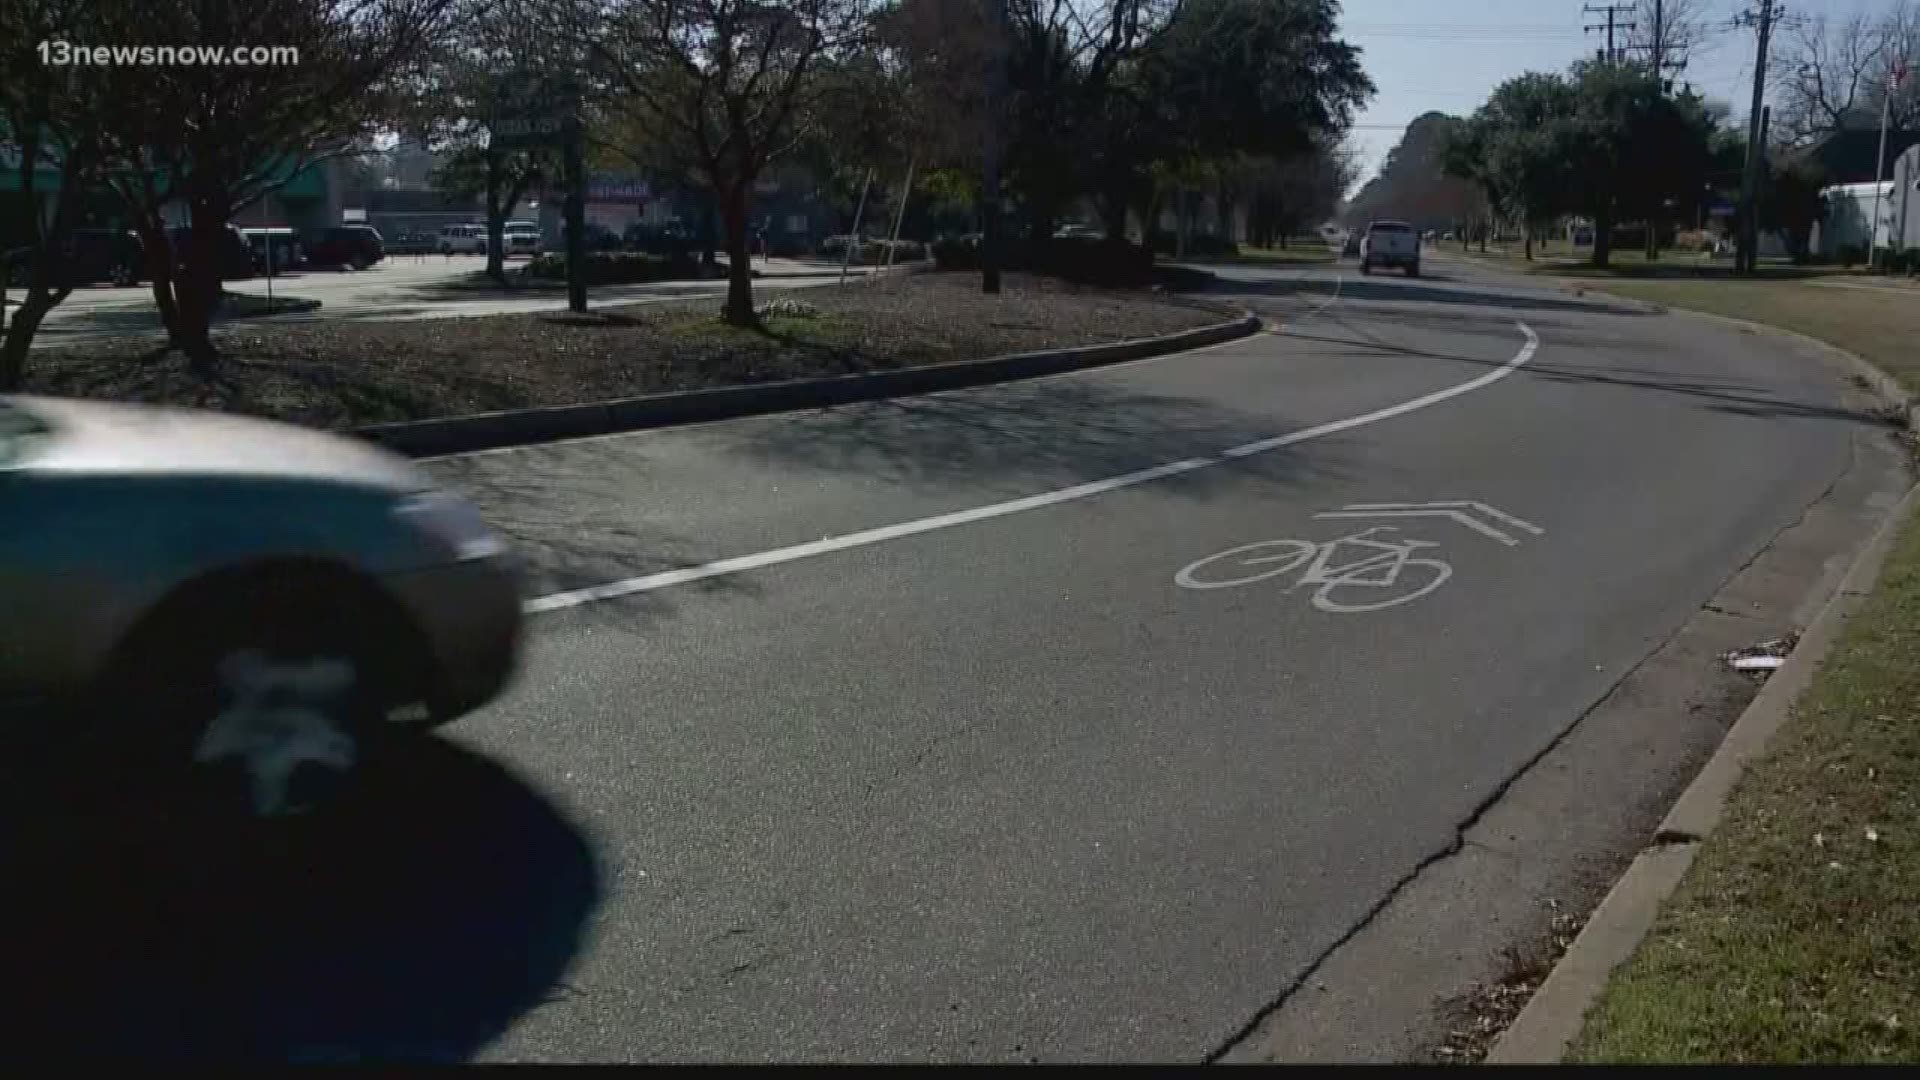 City Leaders are trying to improve safety and traffic flow in Ocean View.